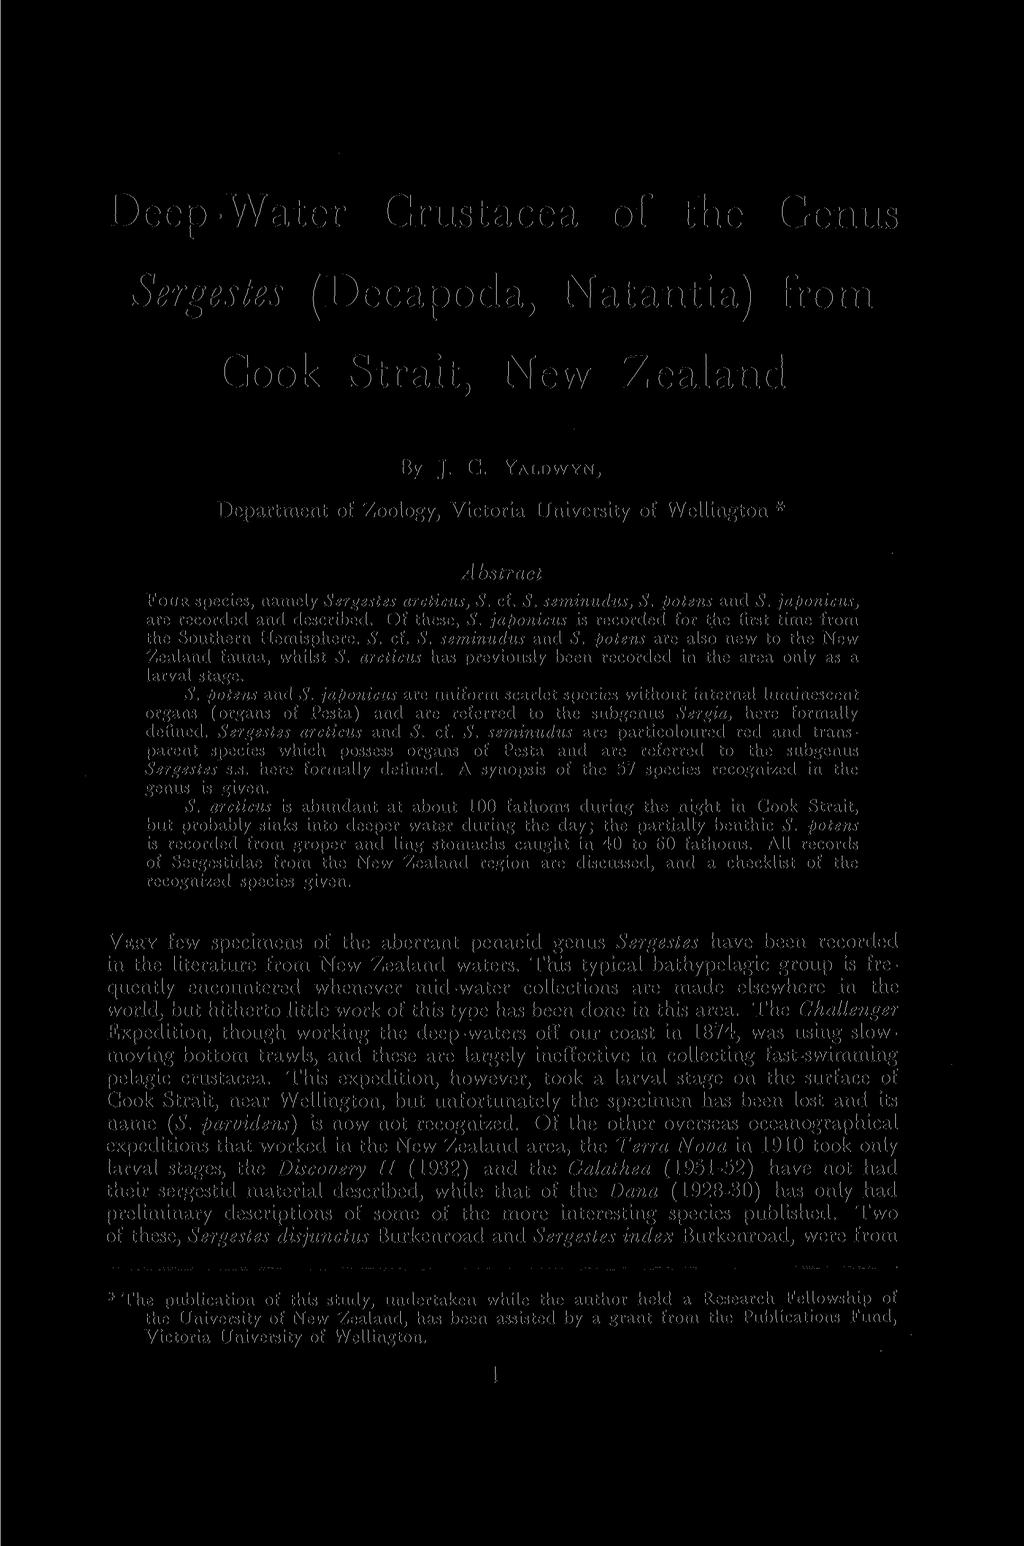 Deep-Water Crustacea of the Genus Sergestes (Decapoda, Natantia) from Cook Strait, New Zealand By J. C. YALDWYN, Department of Zoology, Victoria University of Wellington * Abstract FOUR species, namely Sergestes arcticus, S.